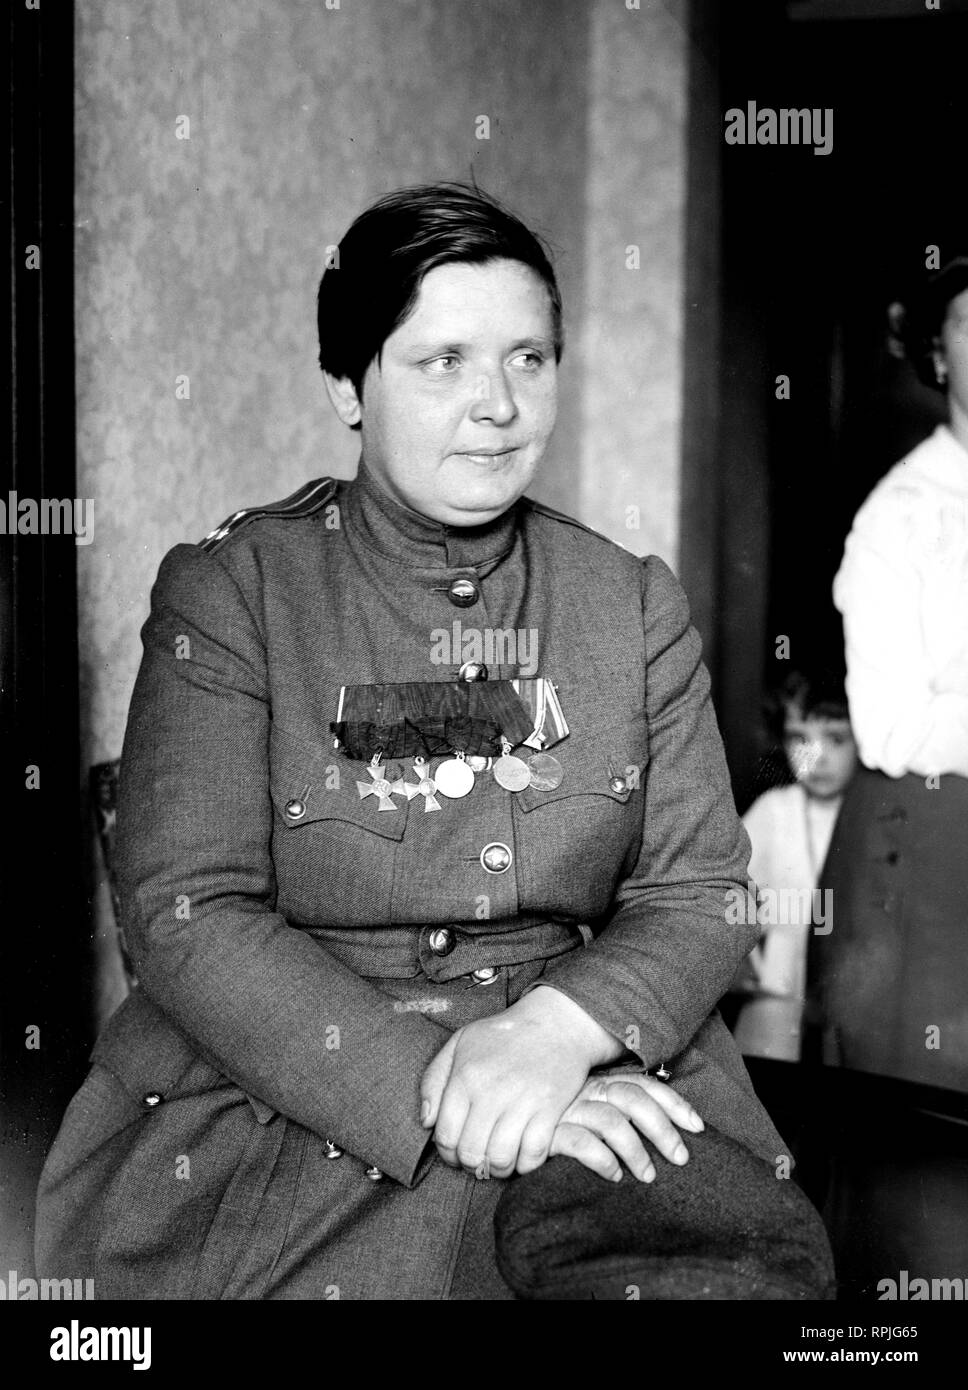 26866u Maria Leontievna Bochkareva (1889-1920) a Russian woman who served in World War I and formed the Women's Battalion of Death. In 1918 she visited the United States including New York City. Feb 1918 Stock Photo